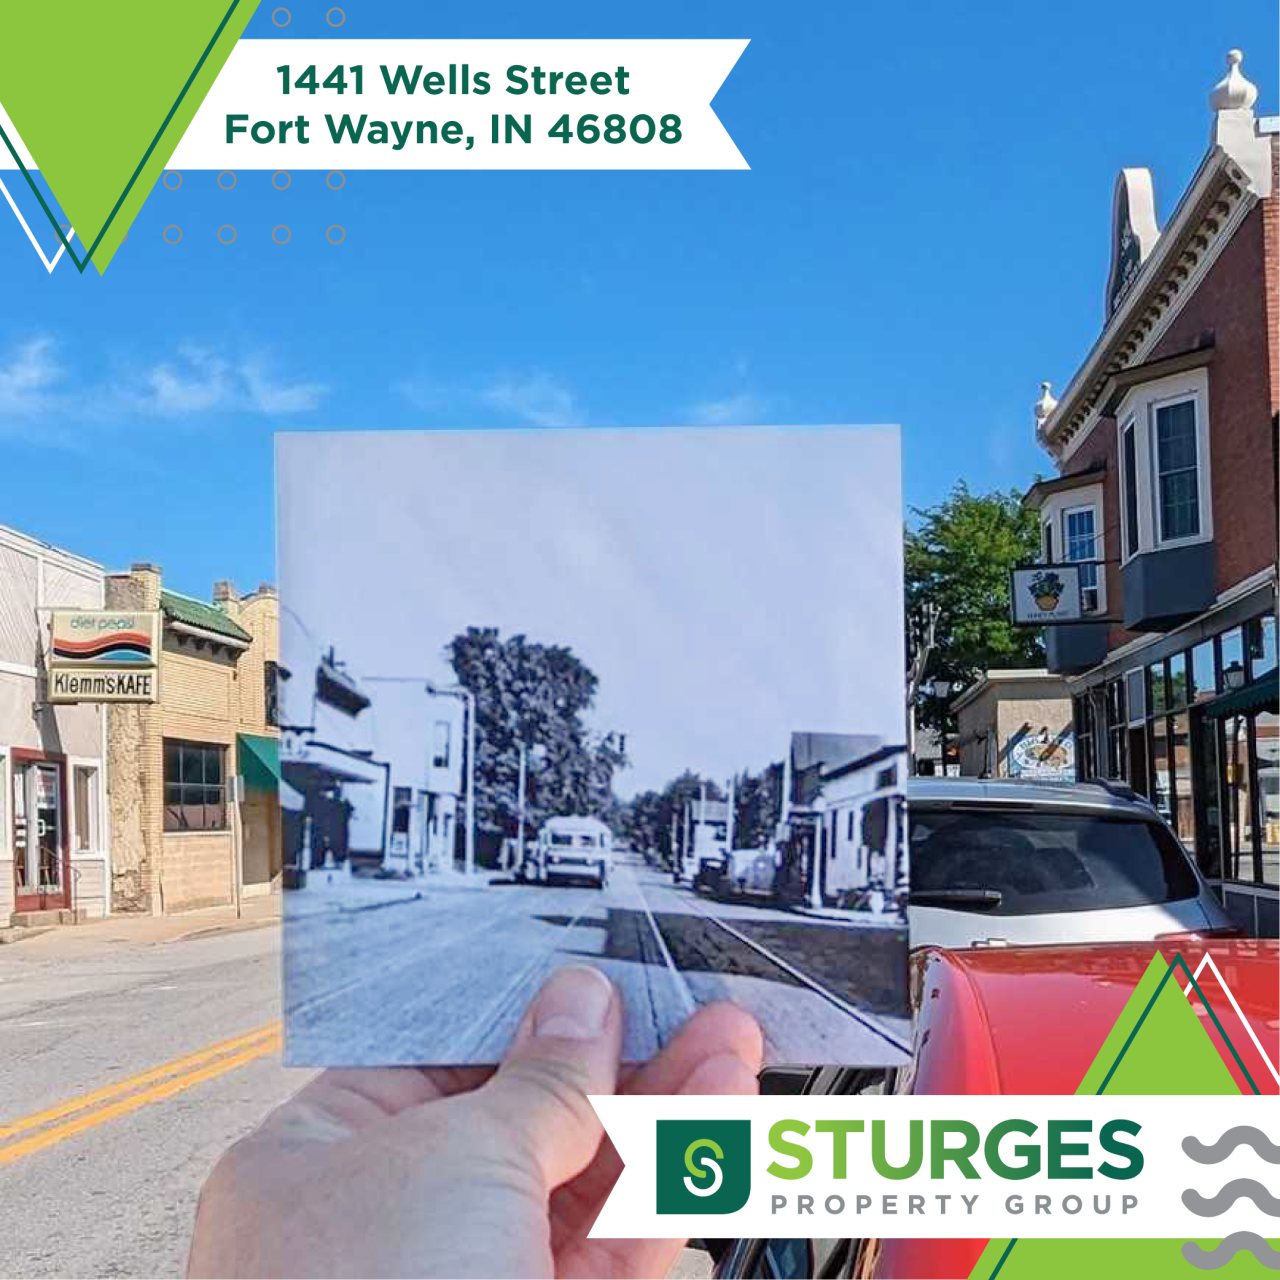 Sturges Property Group - Wells Theater, 1441 Wells St, Fort Wayne, IN 46808